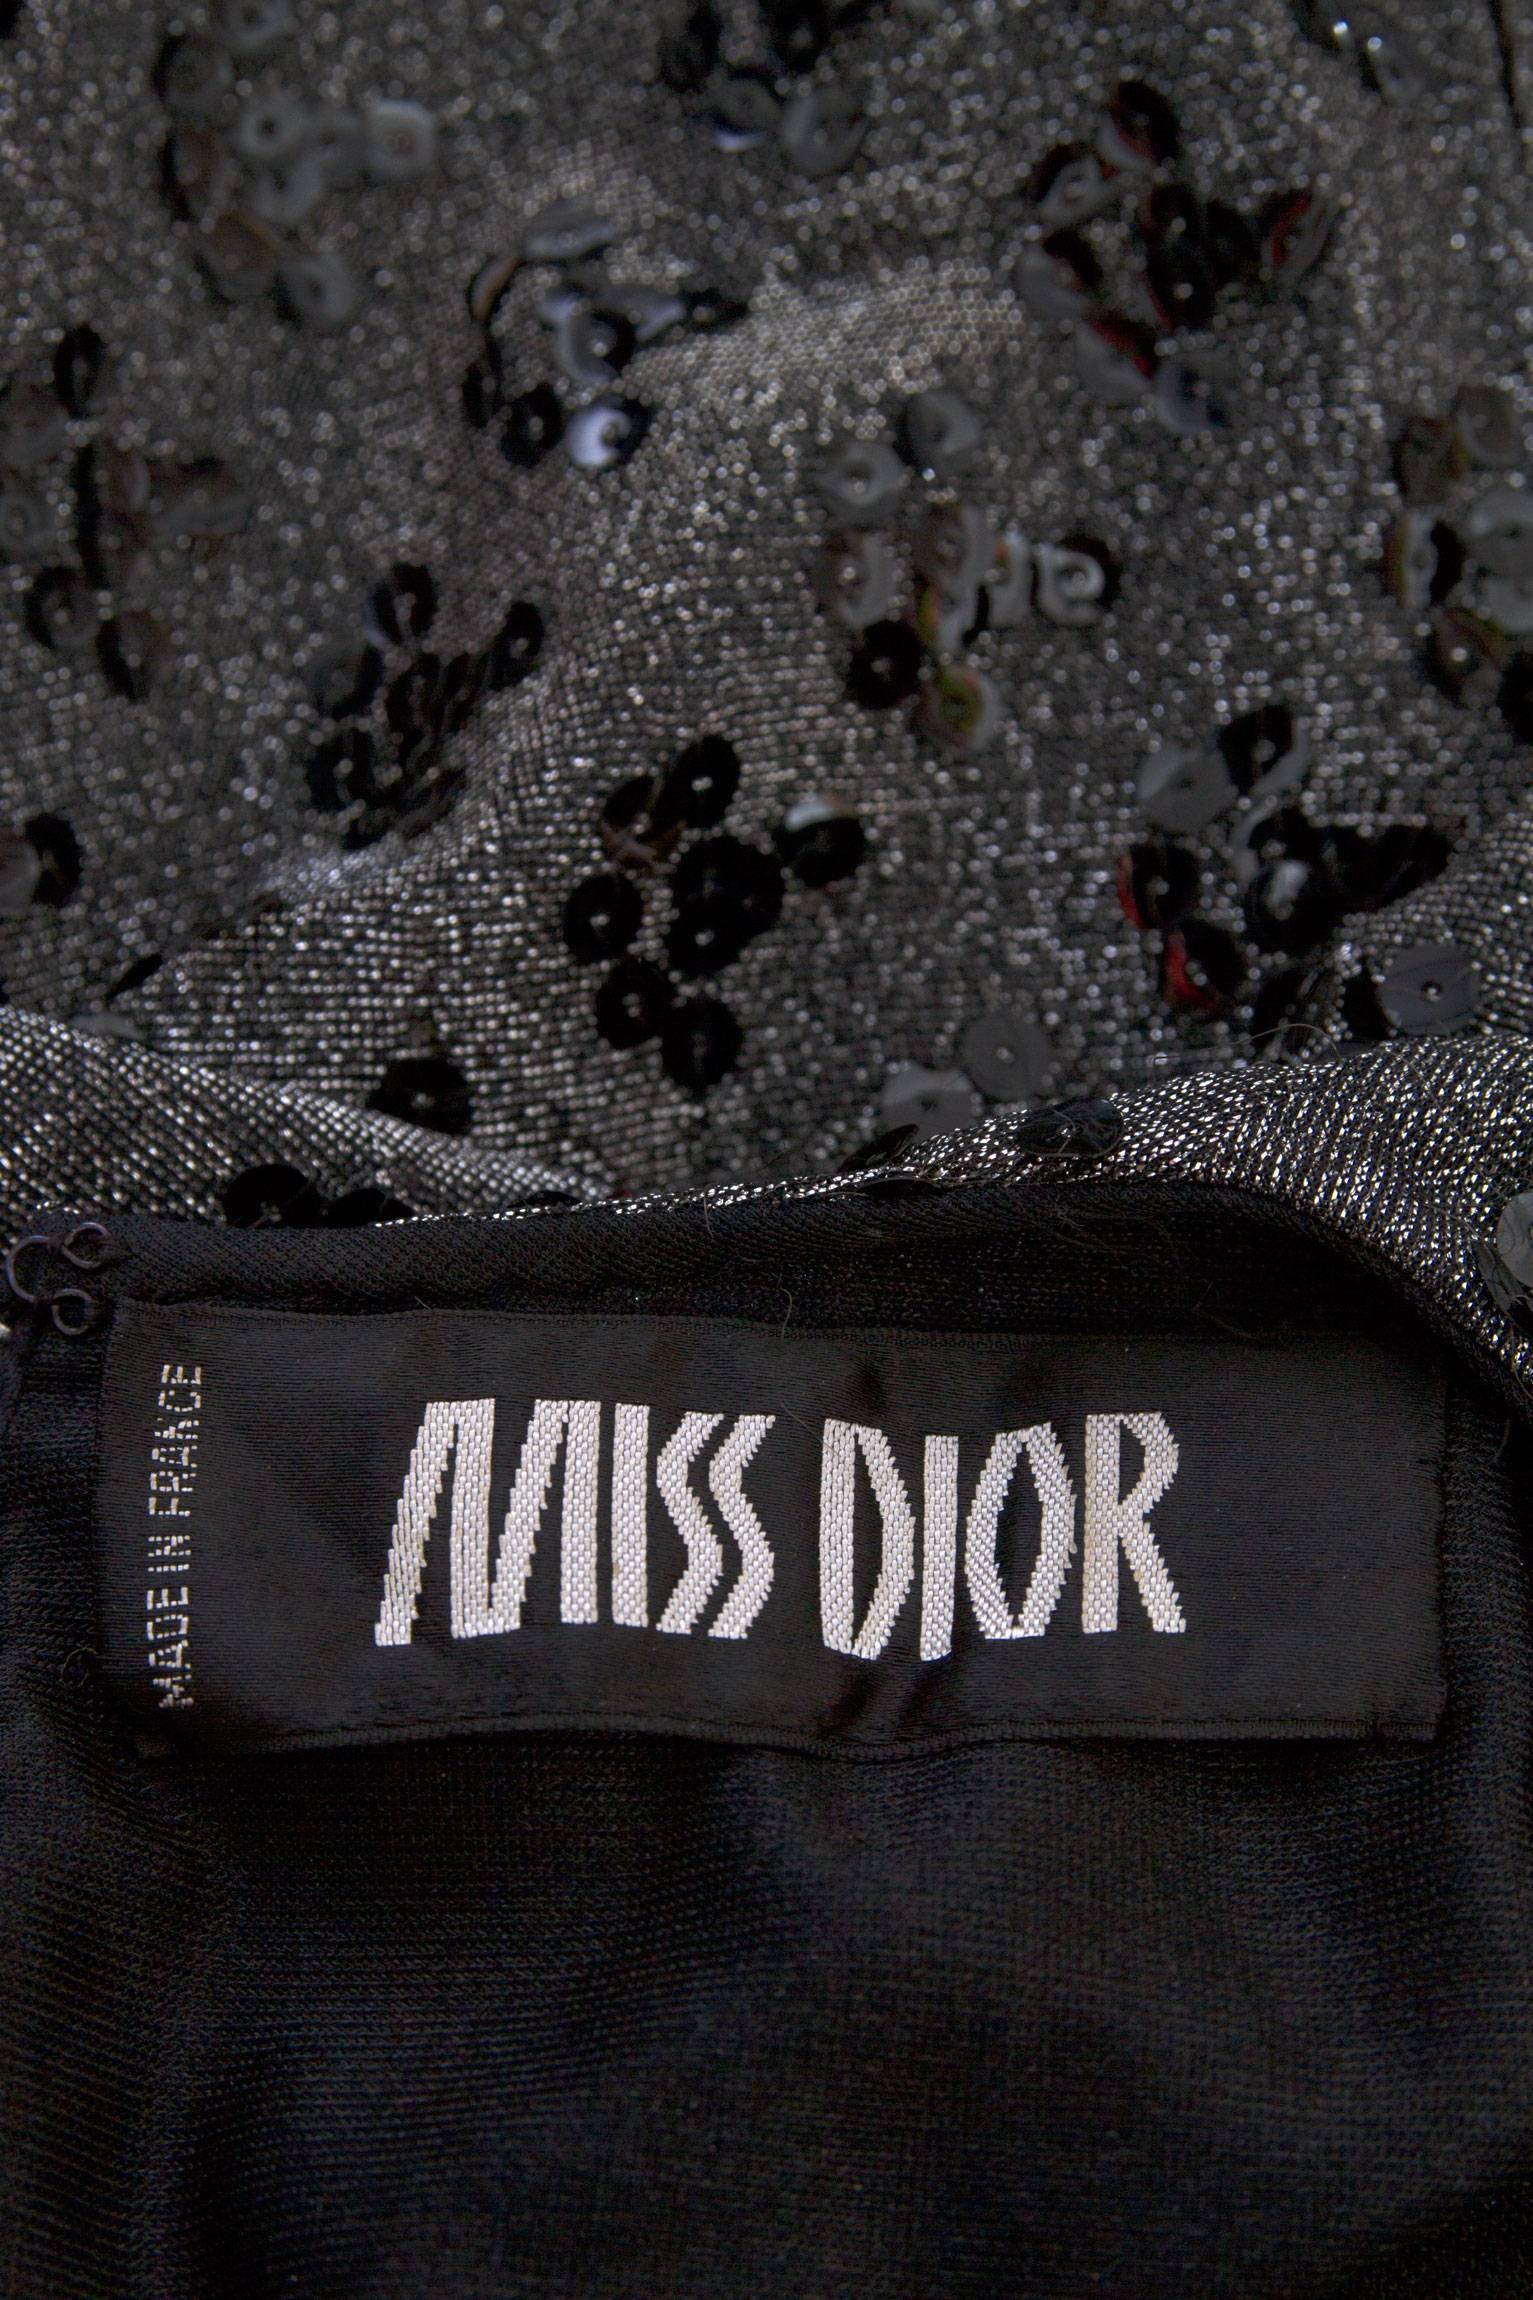 A glamorous 1960s silver lurex cocktail dress by Miss Dior. The dress has a drop waistline, a round neckline and long tapered sleeves. The pleated skirt is separated fromt the fitted bodice by a black beaded trim. The dress is embellished with small